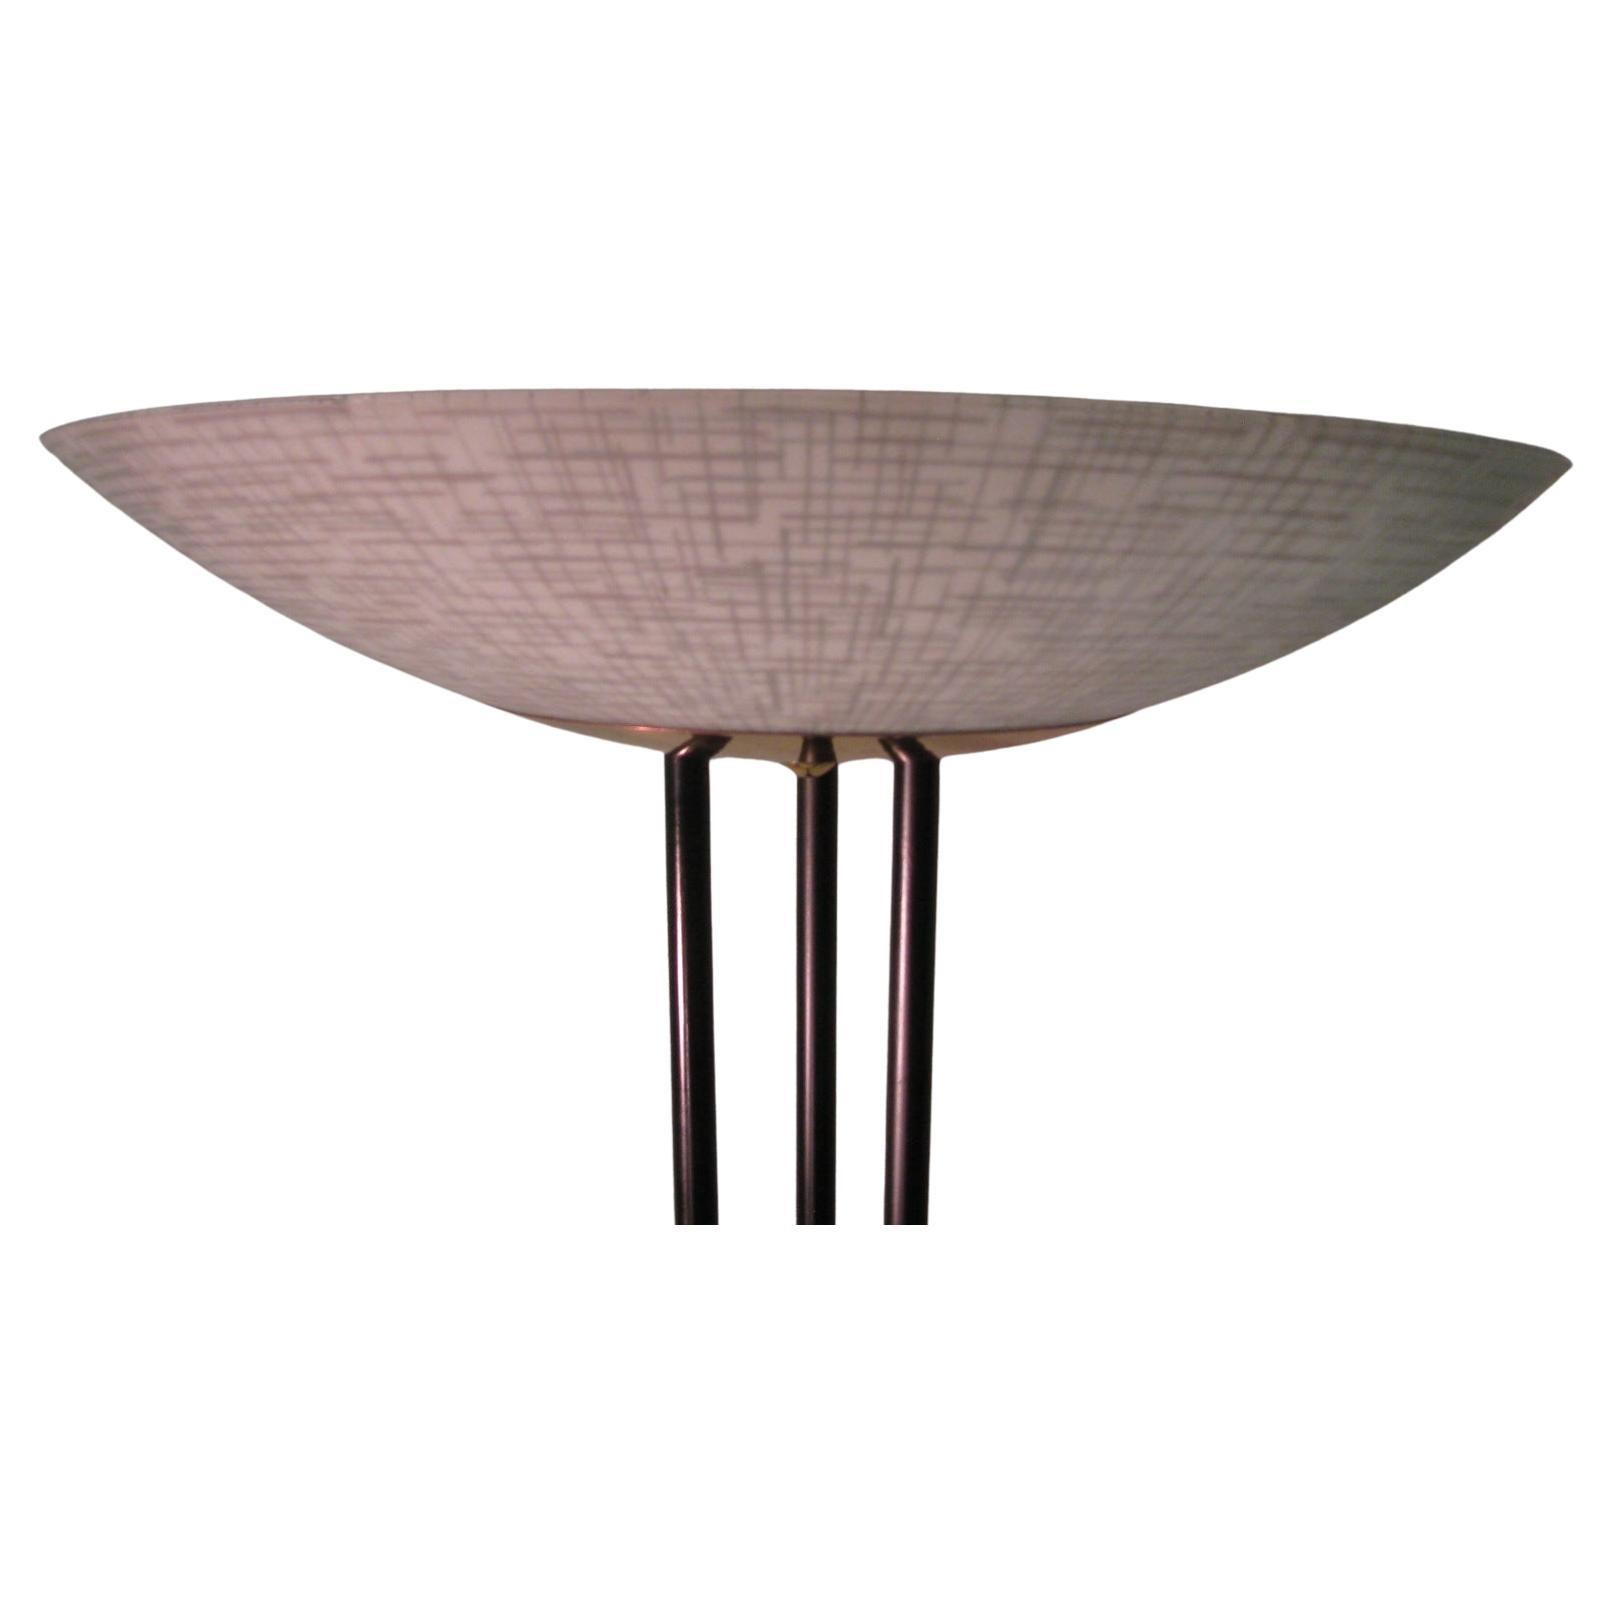 American Mid Century Modern Gerald Thurston Torchiere Lamp with Glass Dish Shade For Sale